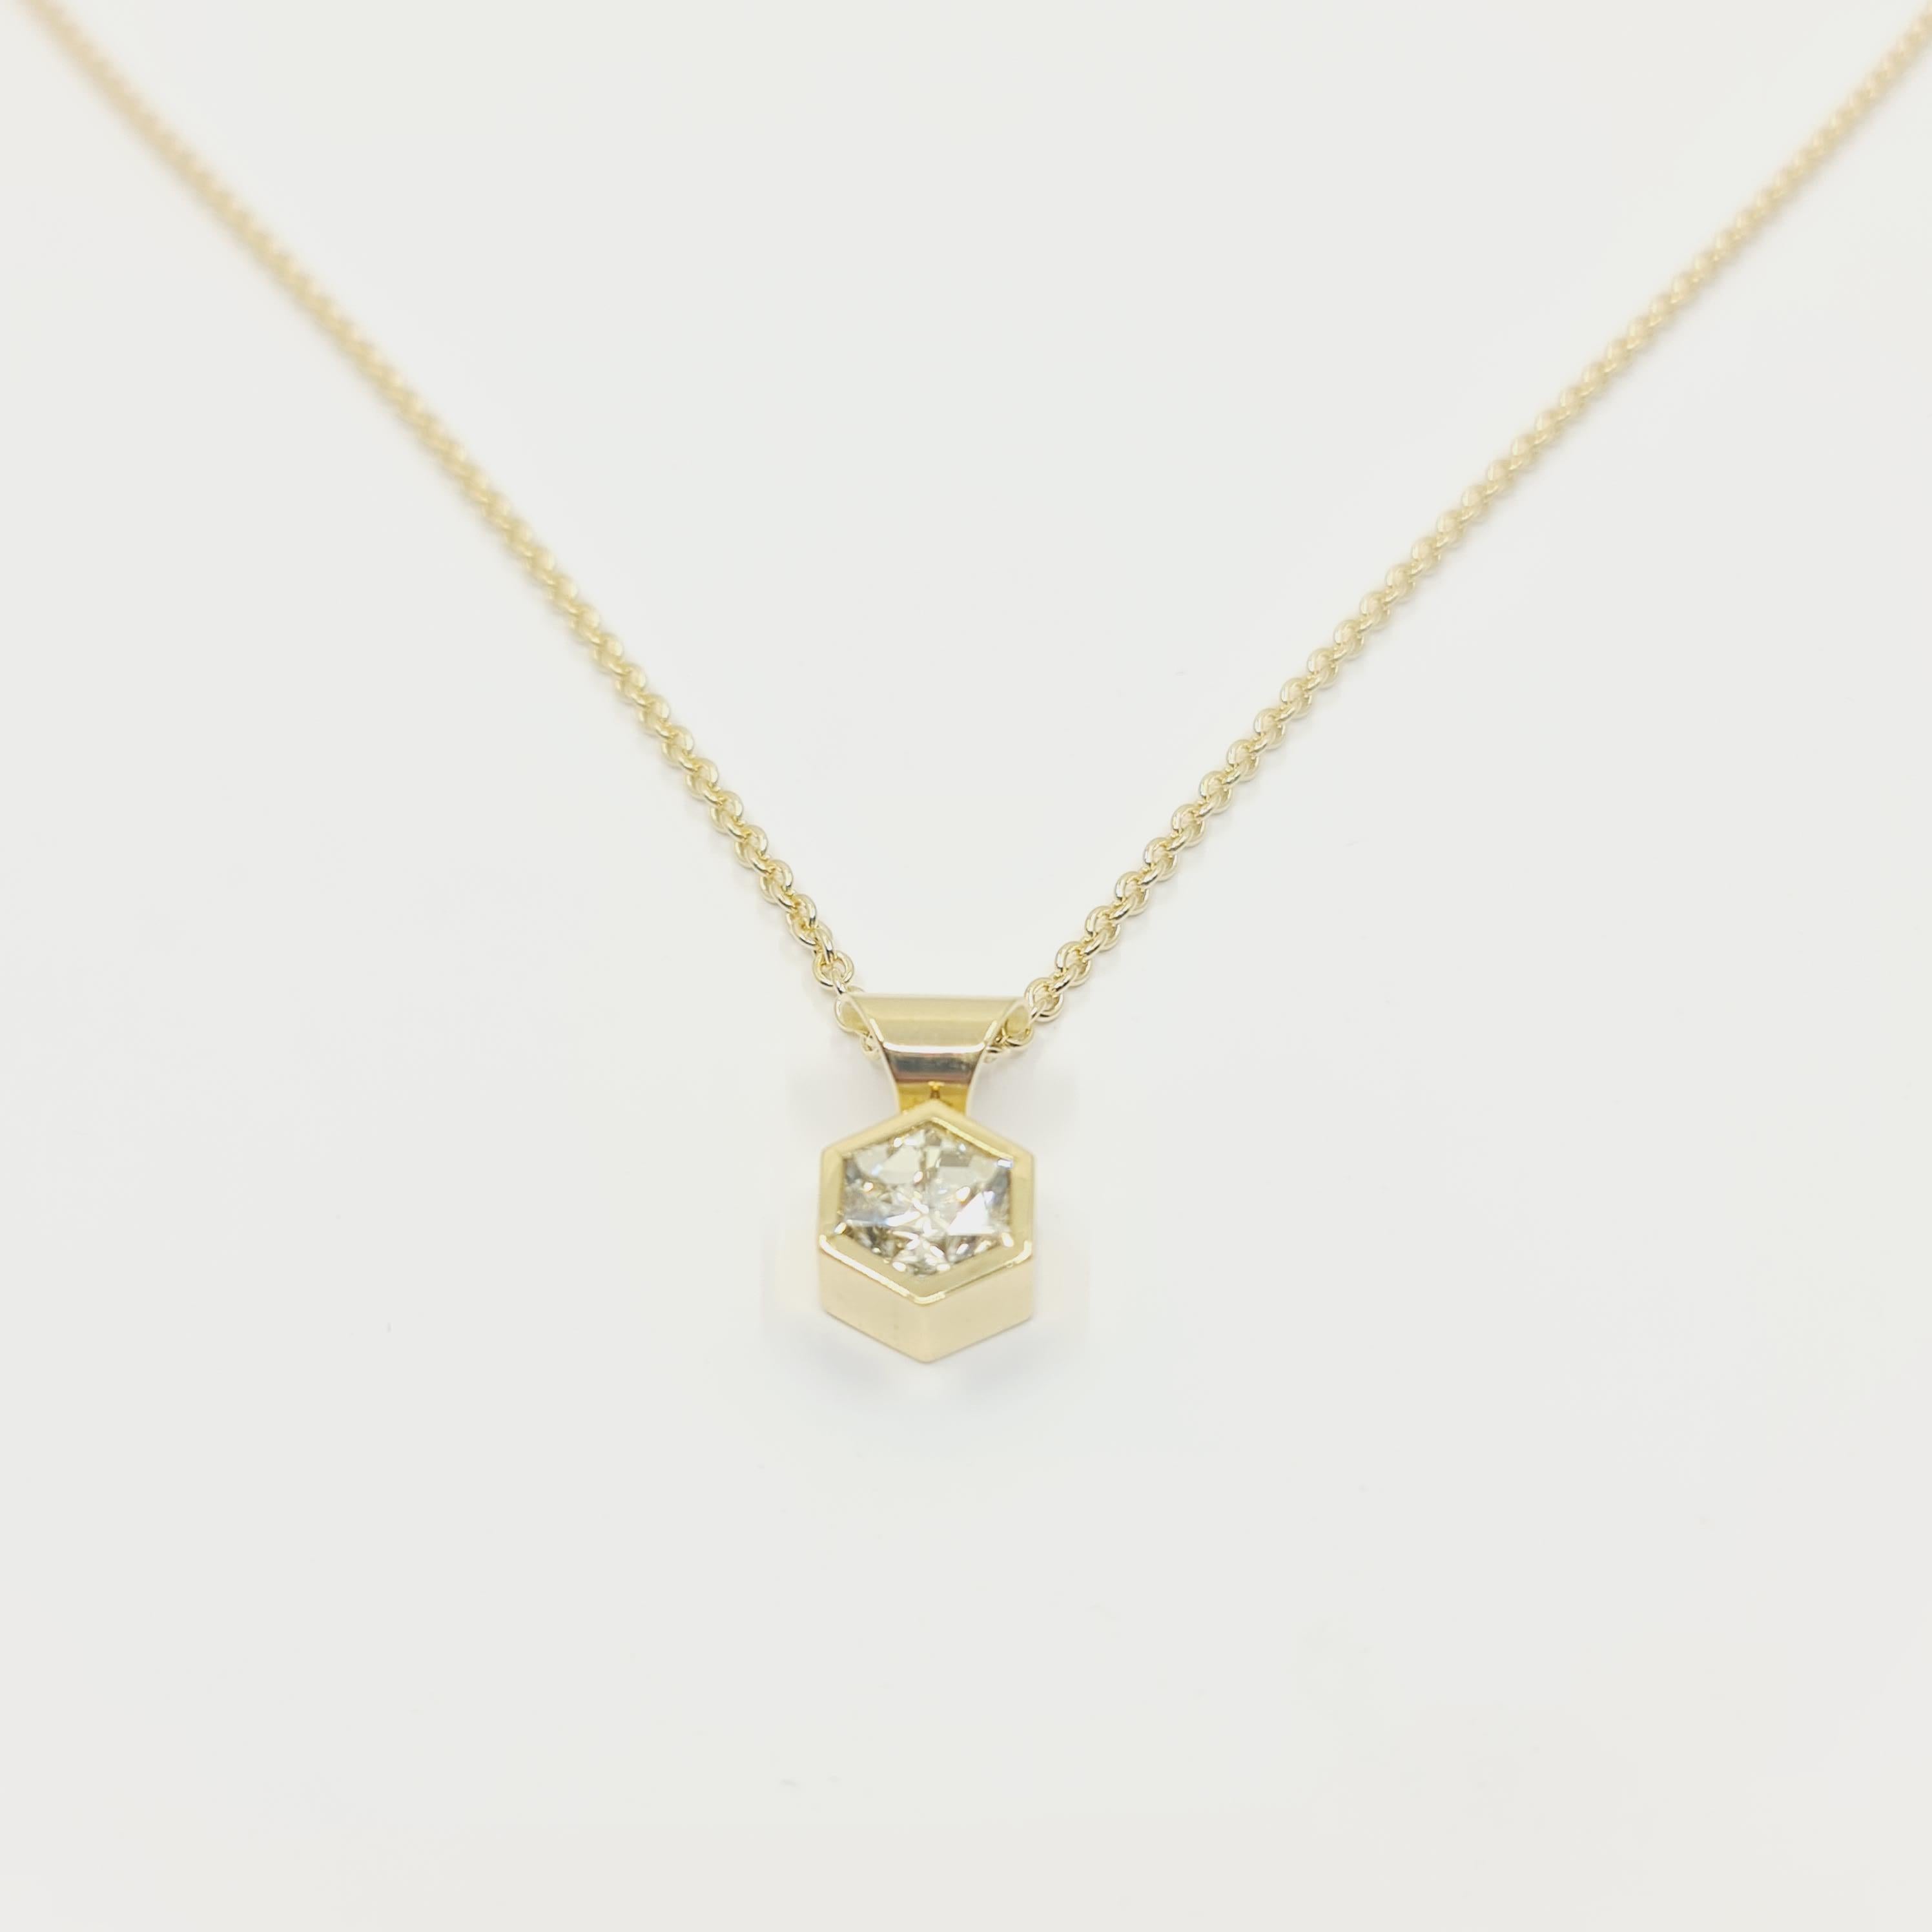 HRD Certified 2.00 Ct. Diamond Necklace 750 Gold with Rare Hexagon Cut Diamond For Sale 5